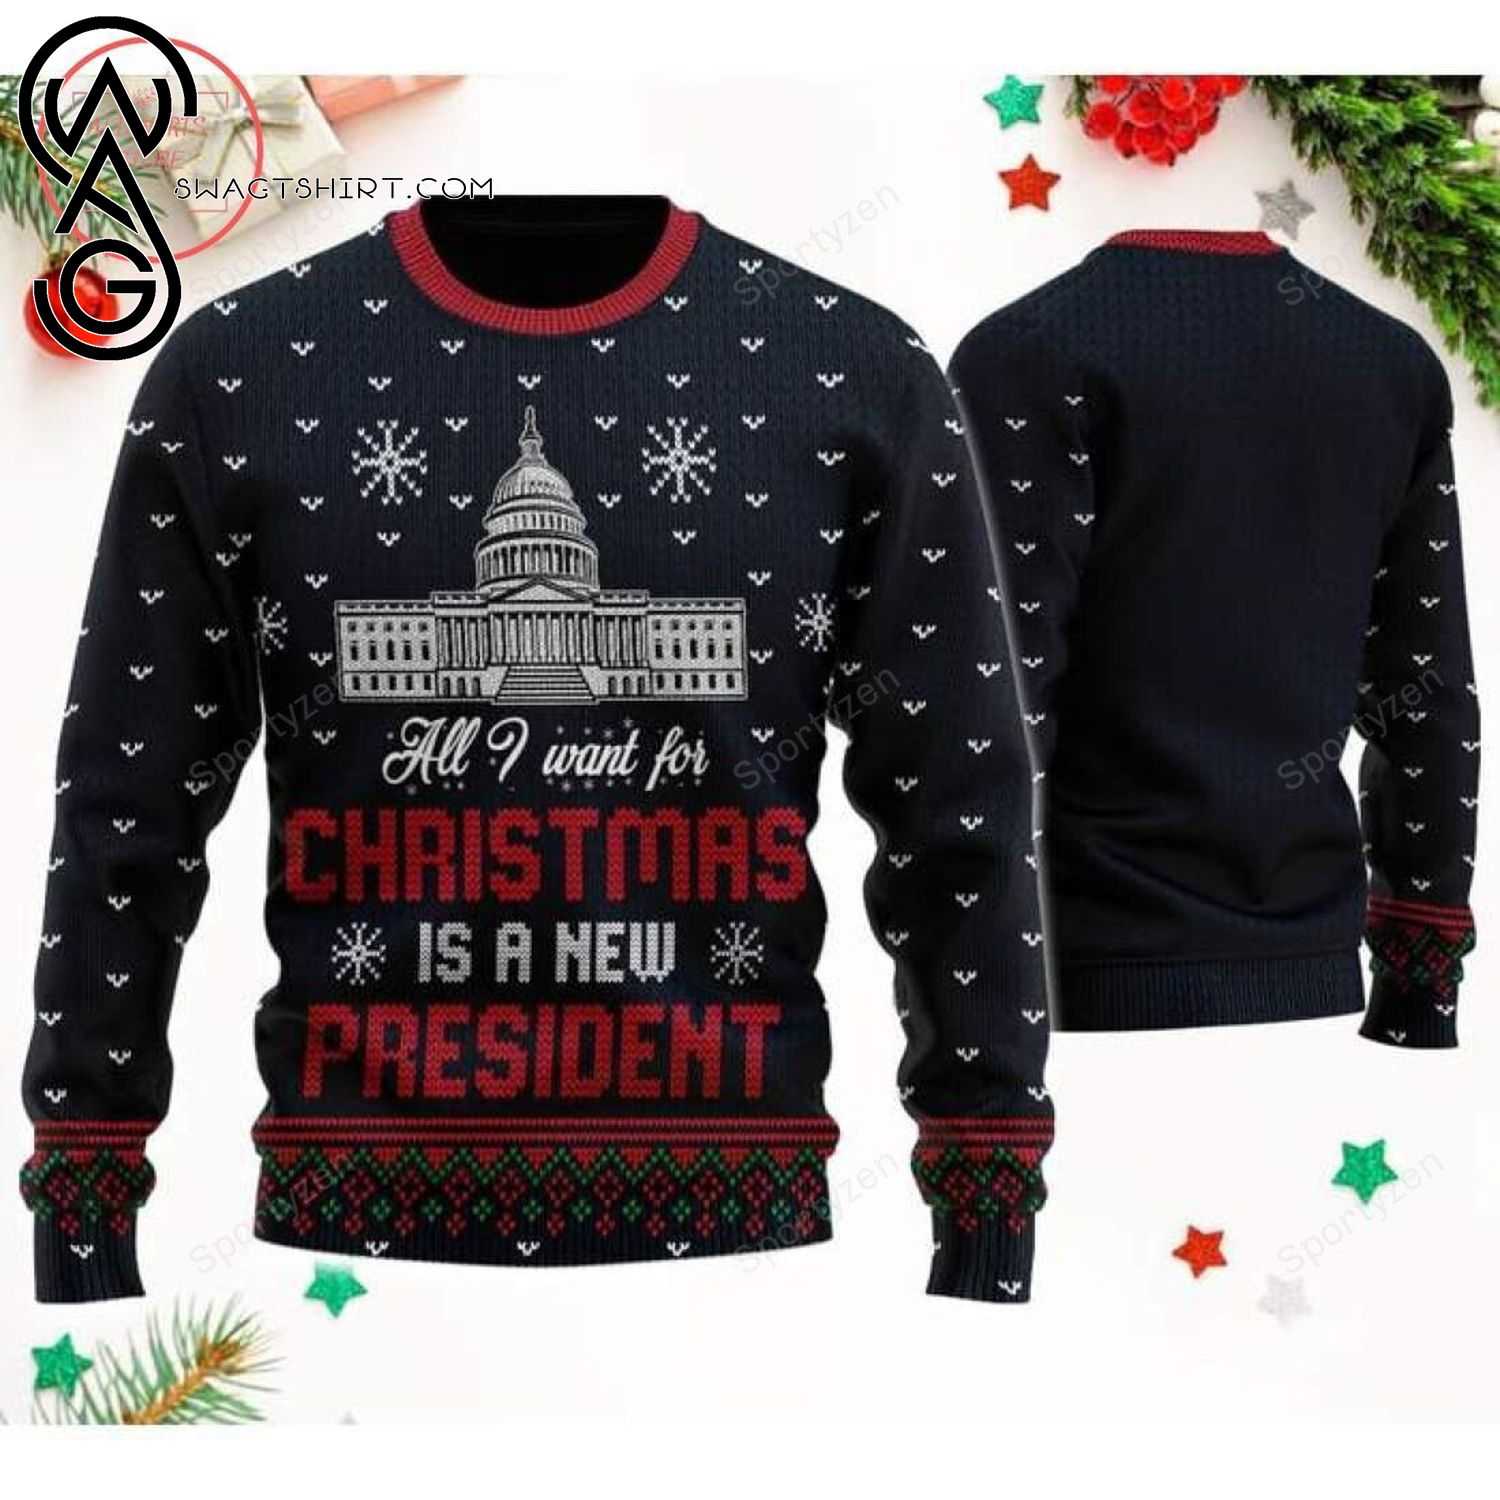 All I Want For Christmas Is A New President Full Print Ugly Christmas Sweater